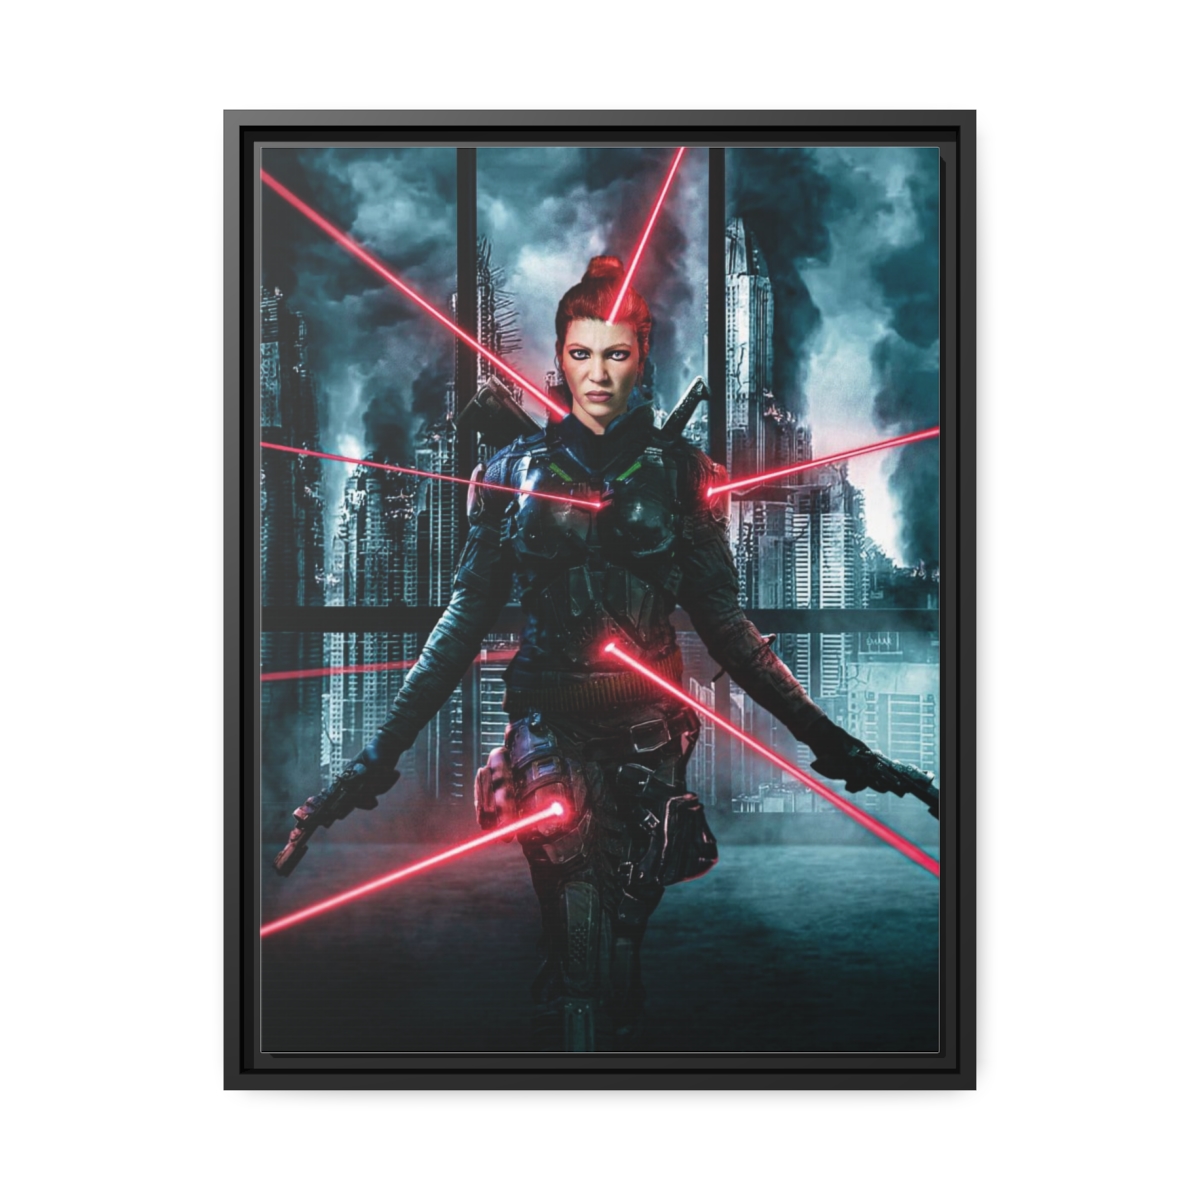 Copy of Rogue Assassin epic jumbo canvas art limited edition (18x24) vertical